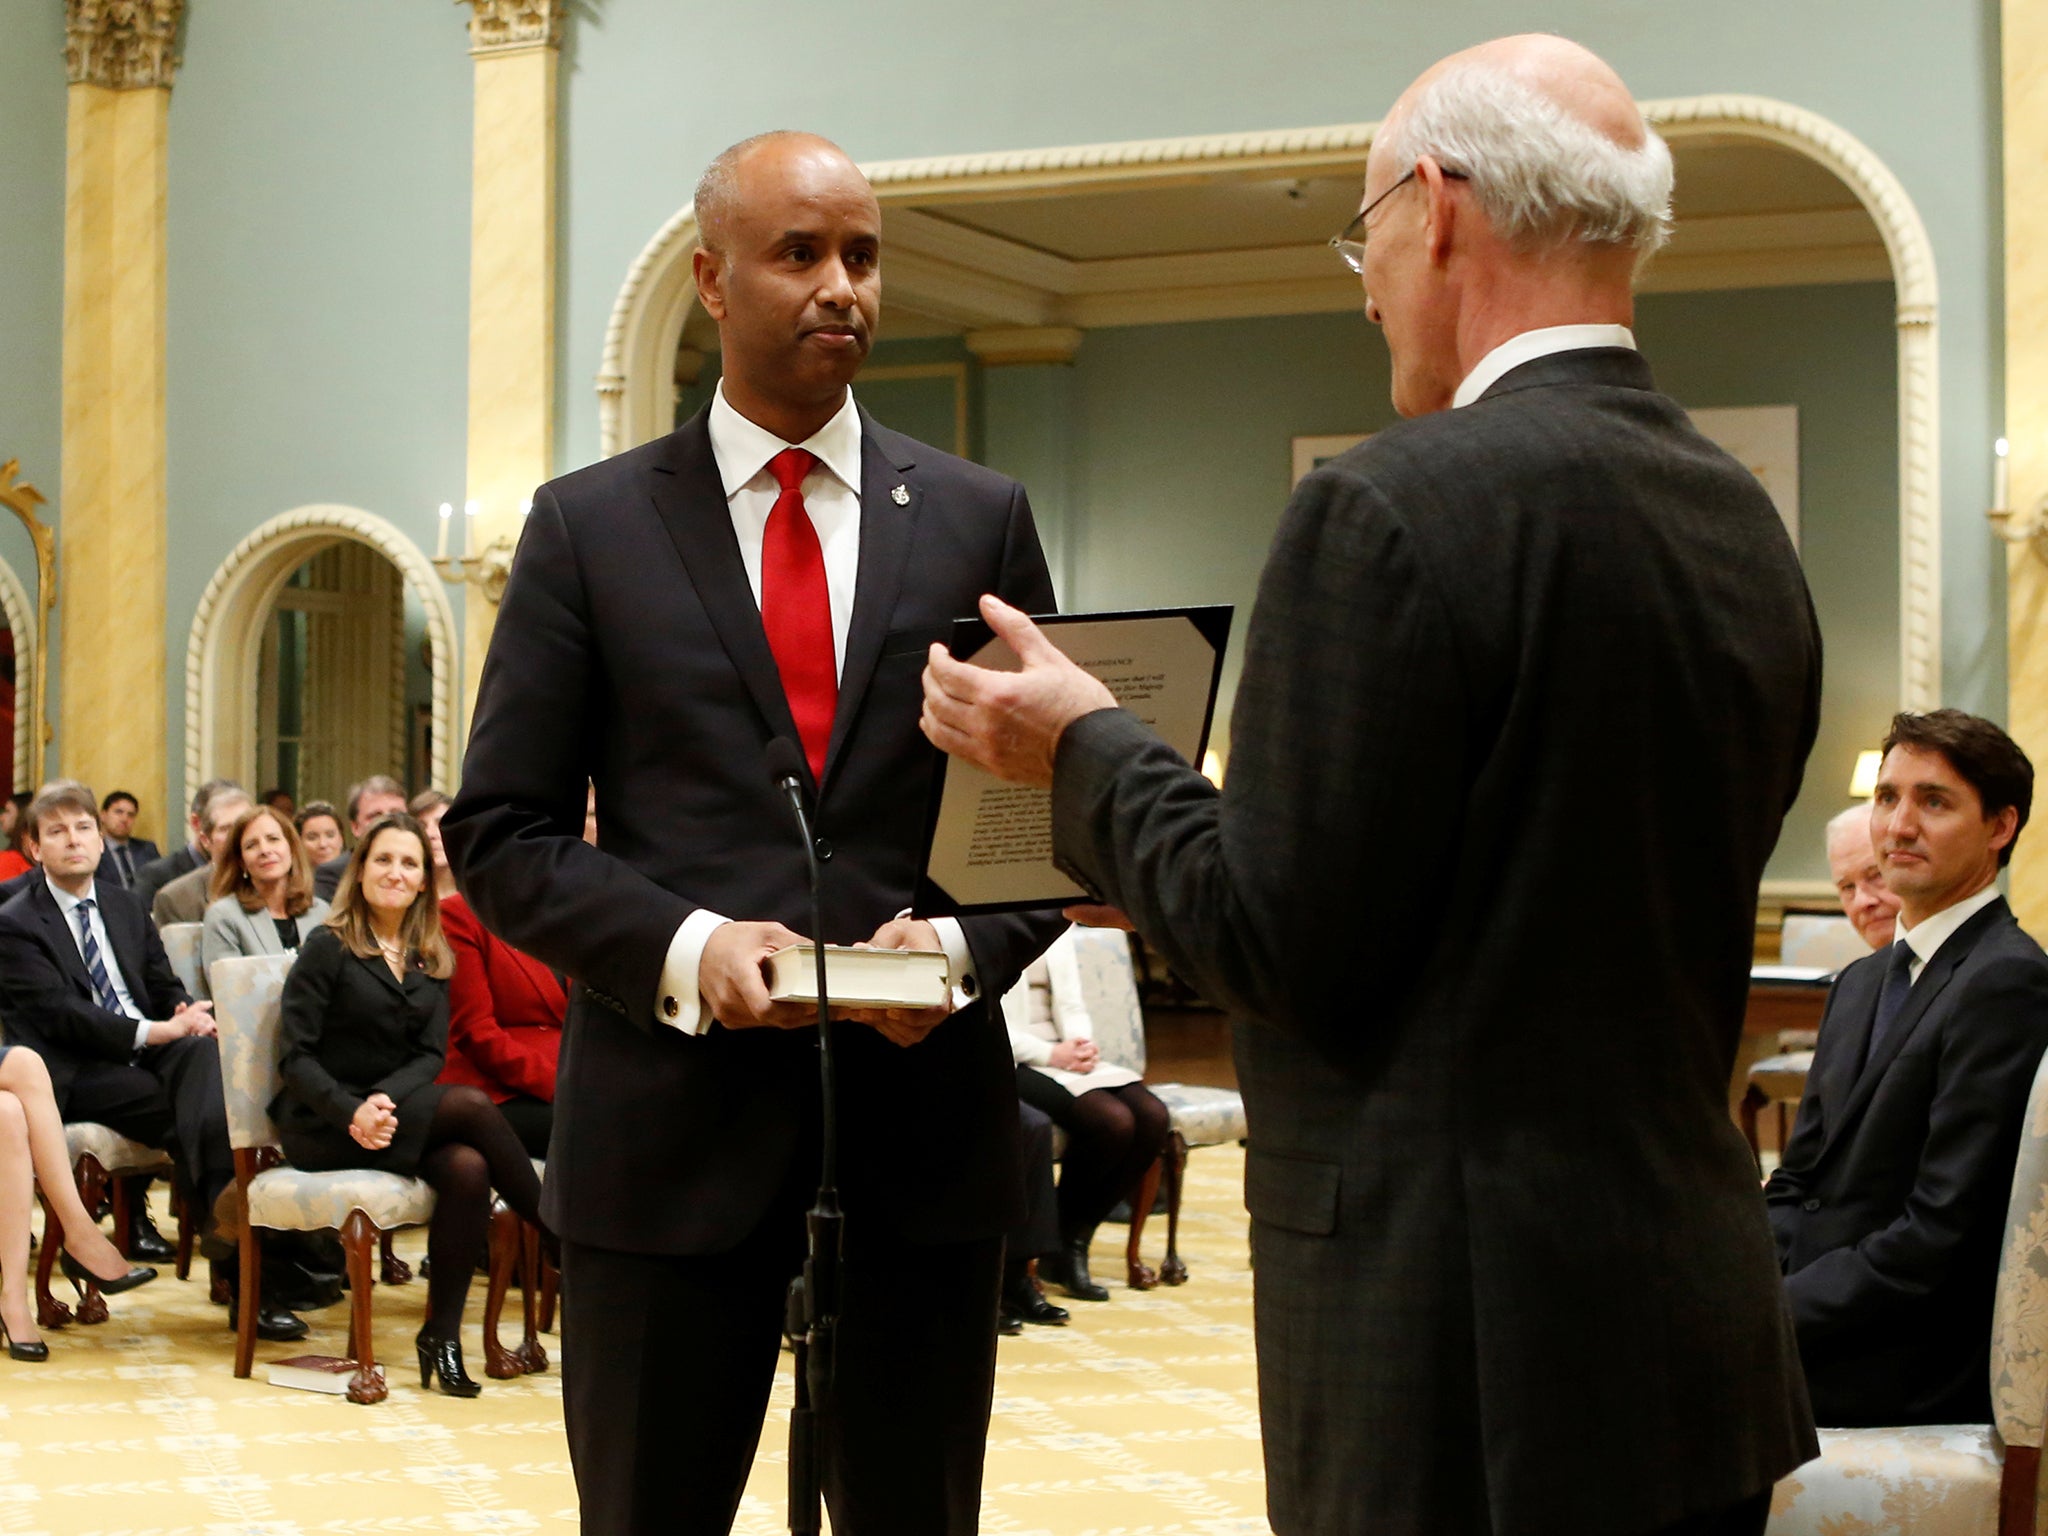 Ahmed Hussen during his recent swearing-in ceremony as Canada's Minister of Immigration, Refugees and Citizenship during a cabinet shuffle at Rideau Hall in Ottawa, Ontario, on January 10 2017